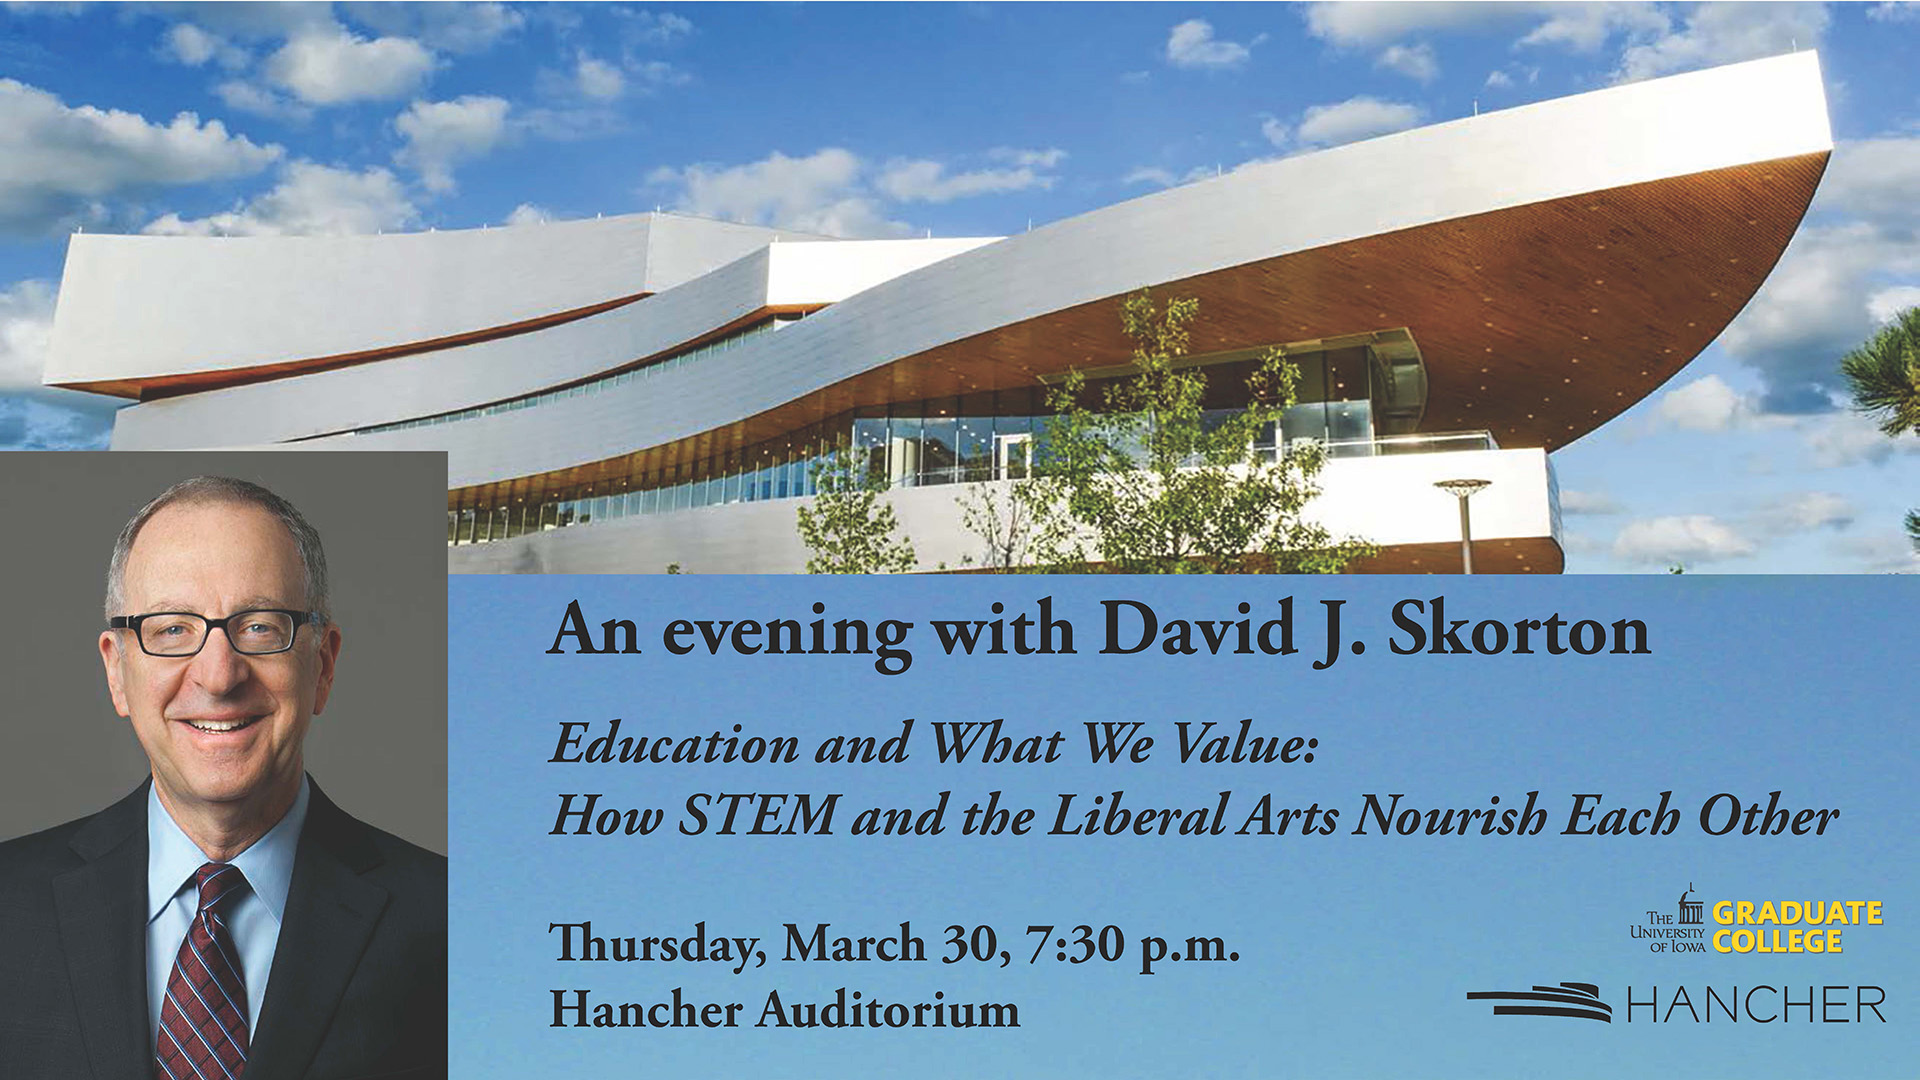 An evening with David J. Skorton. Education and What we value: how STEM and Liberal Arts nourish each other.  Thursday, March 30, 7:30pm.  Hancher Auditorium